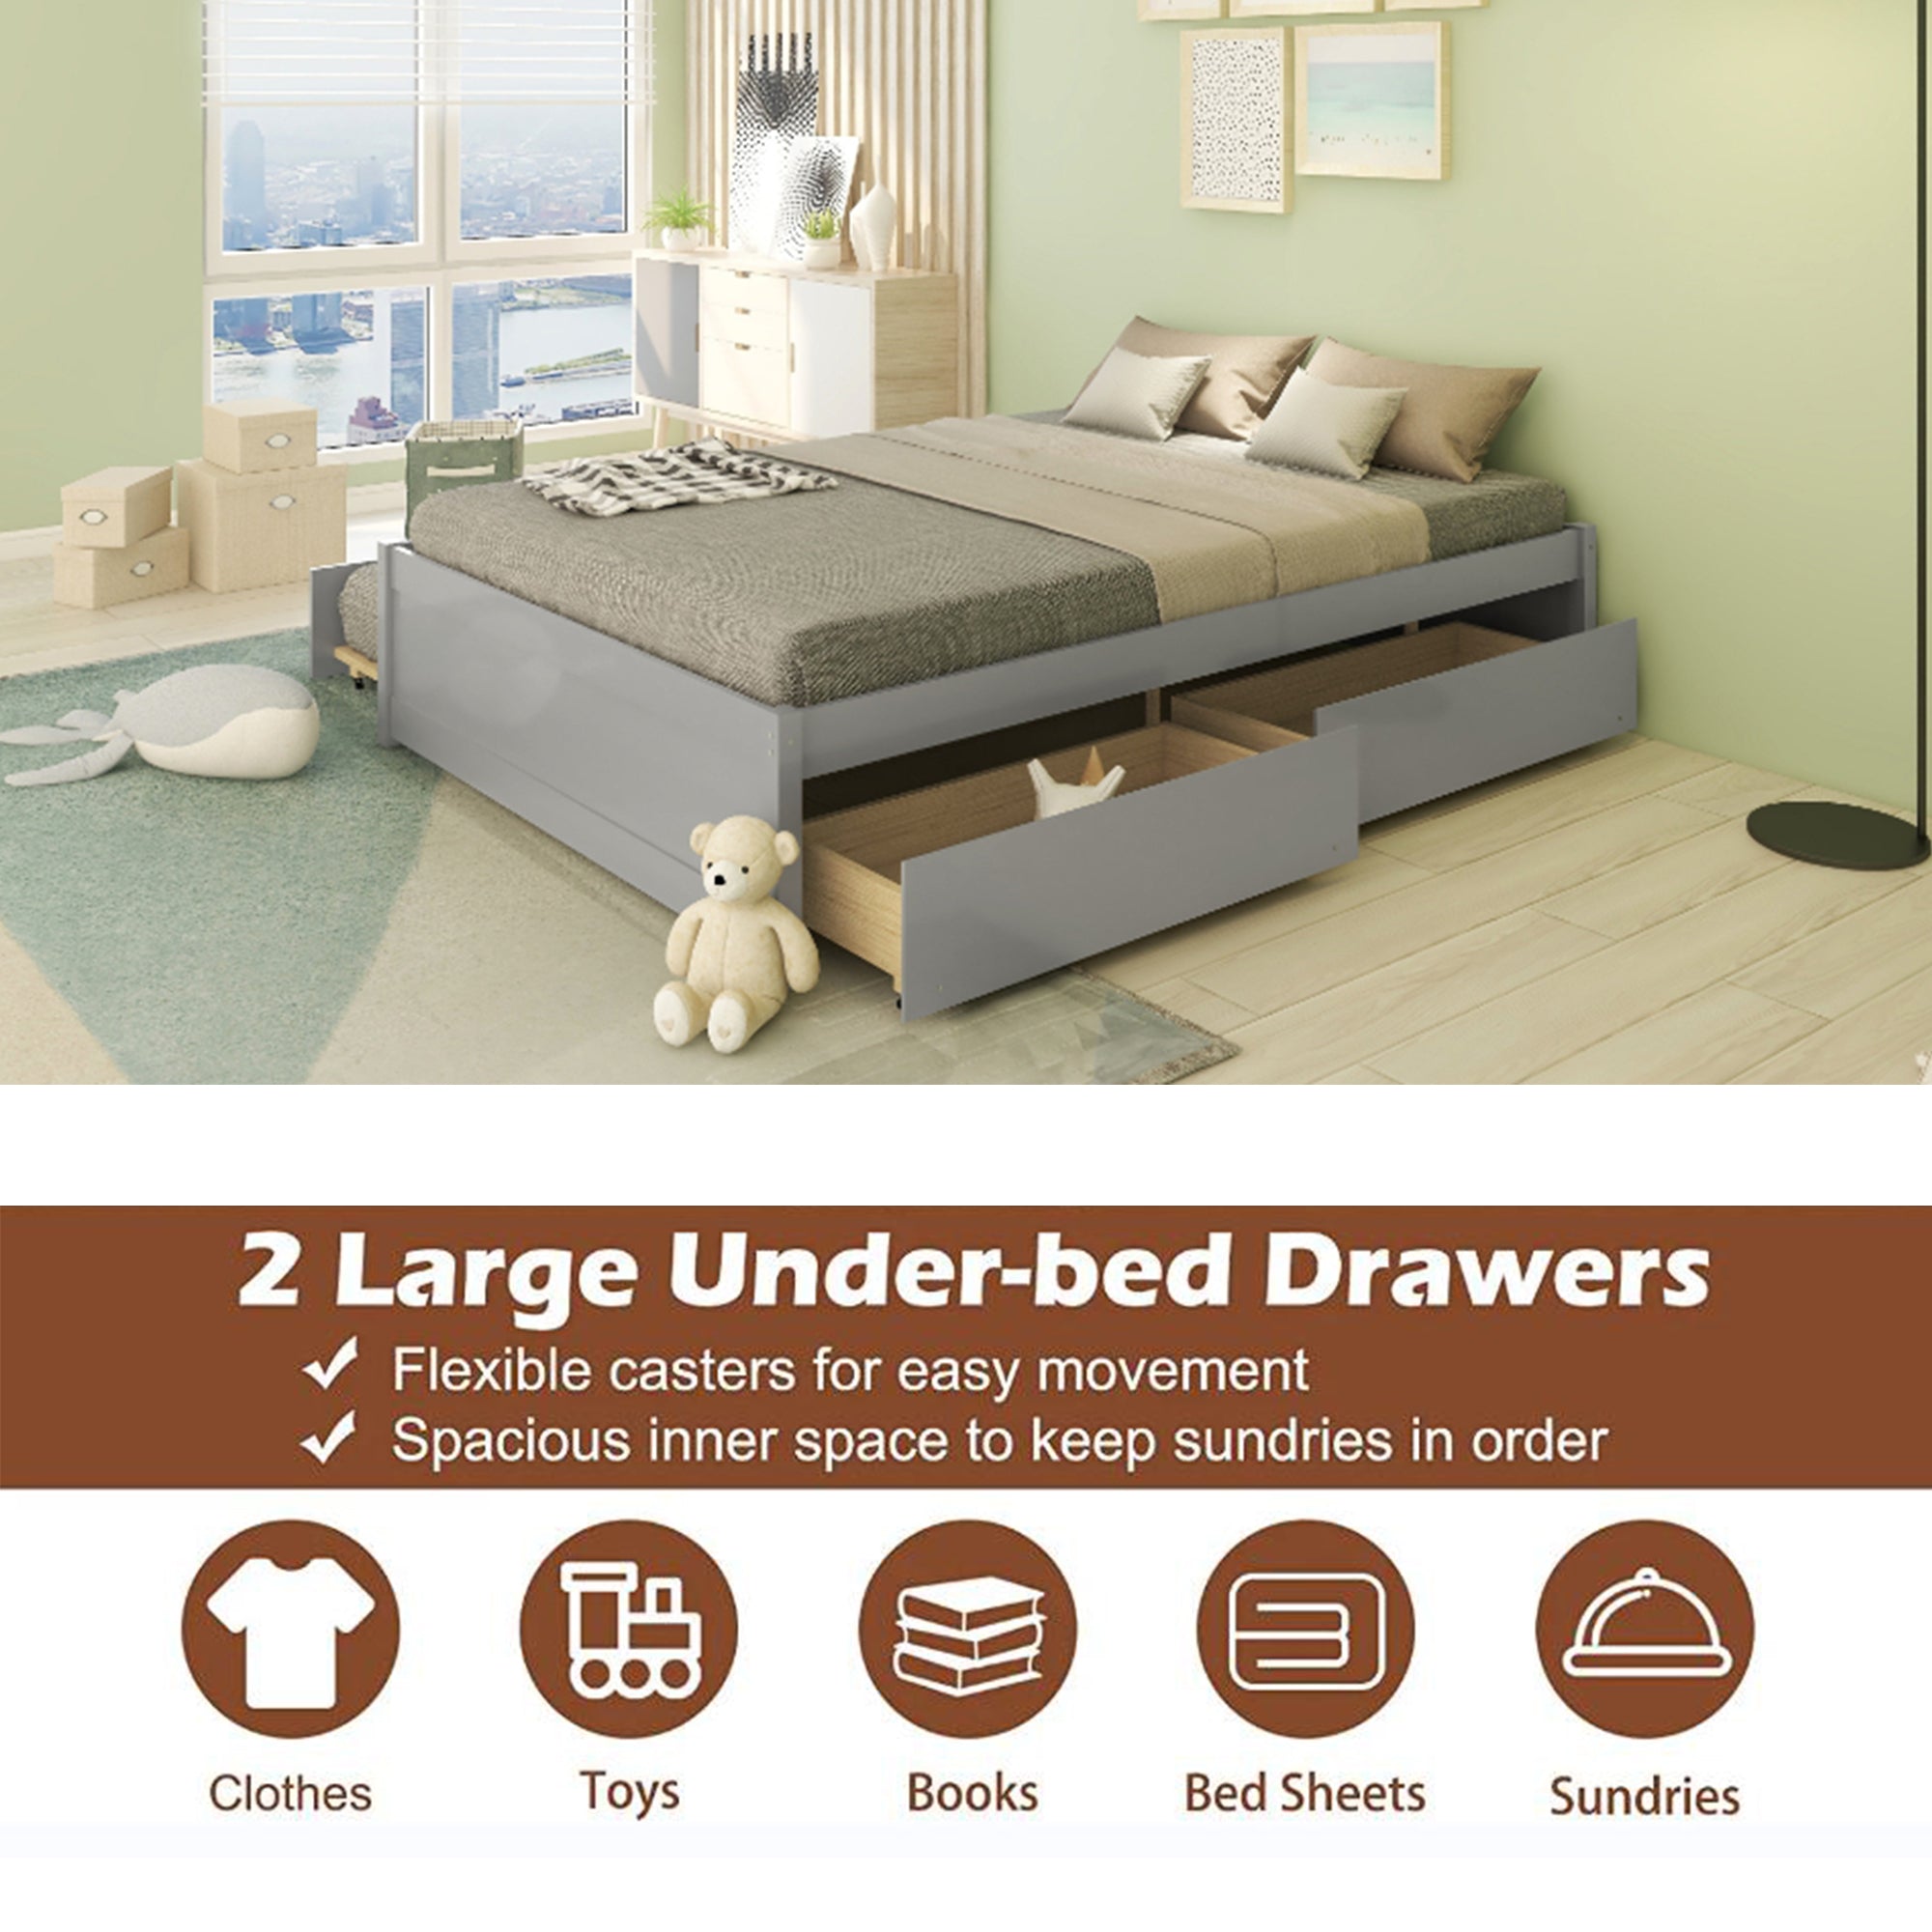 Bellemave Full Bed with Trundle and Storage, Solid Wood Full Size Platform Bed Frame with Drawers, Space-Saving Full Bed for Kids Teens and Adults (Gray)